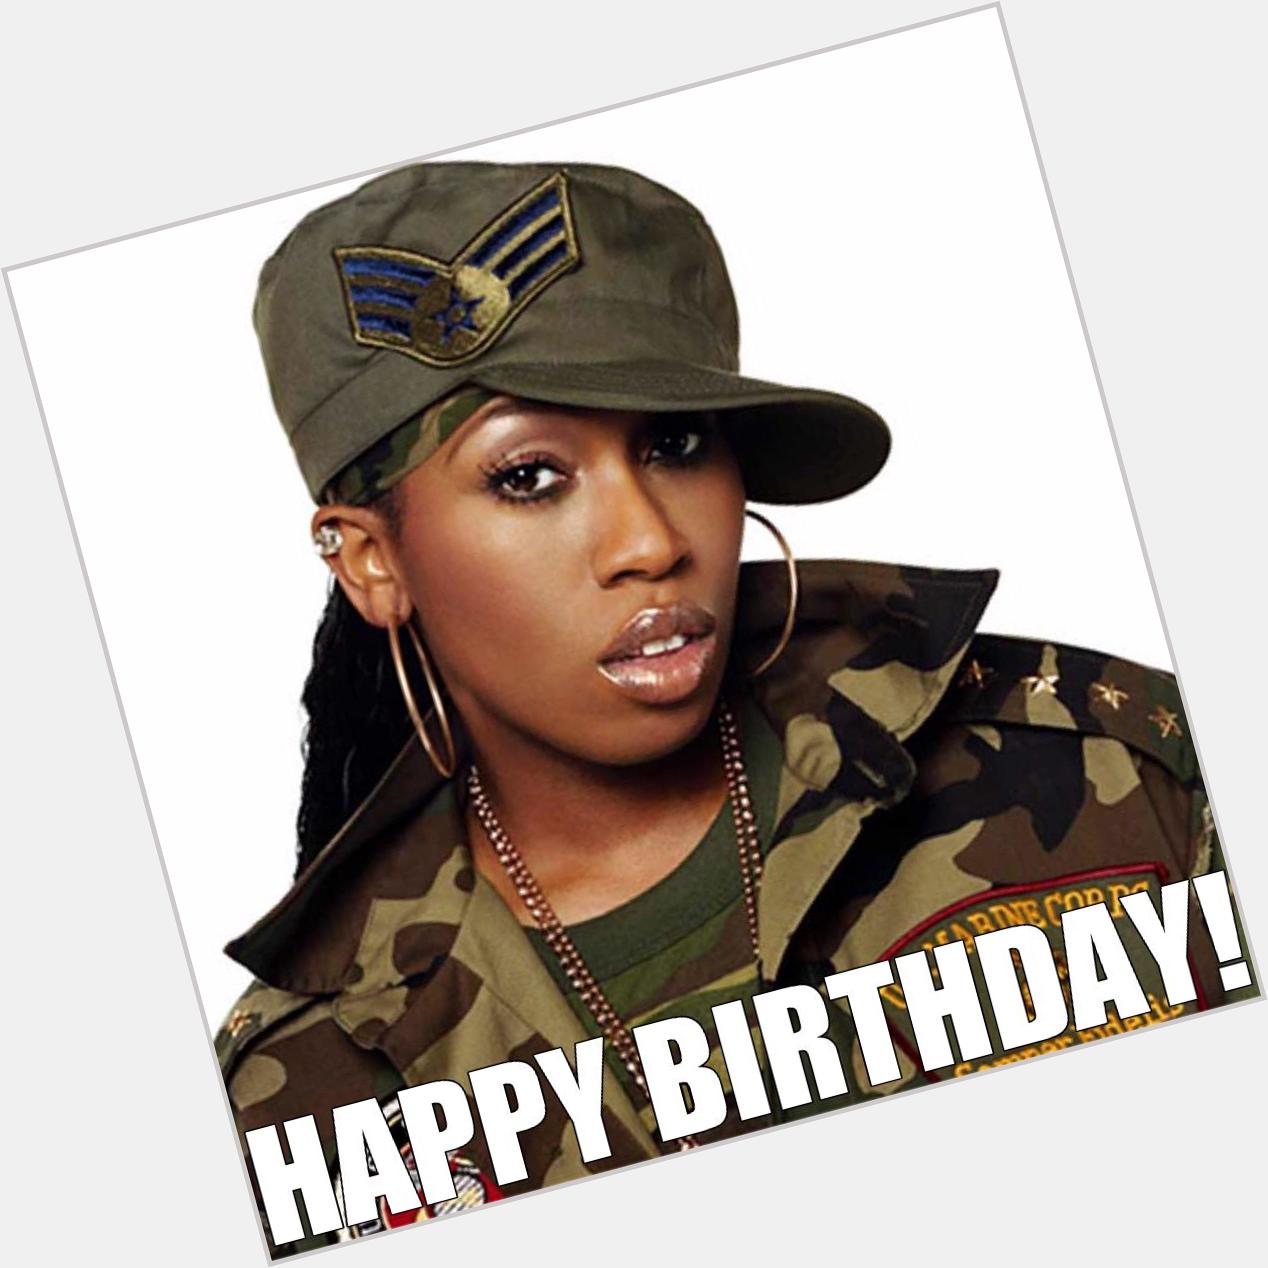 2 Missy Elliot tracks back 2 back for her Birthday. Happy Birthday from In The Morning with 